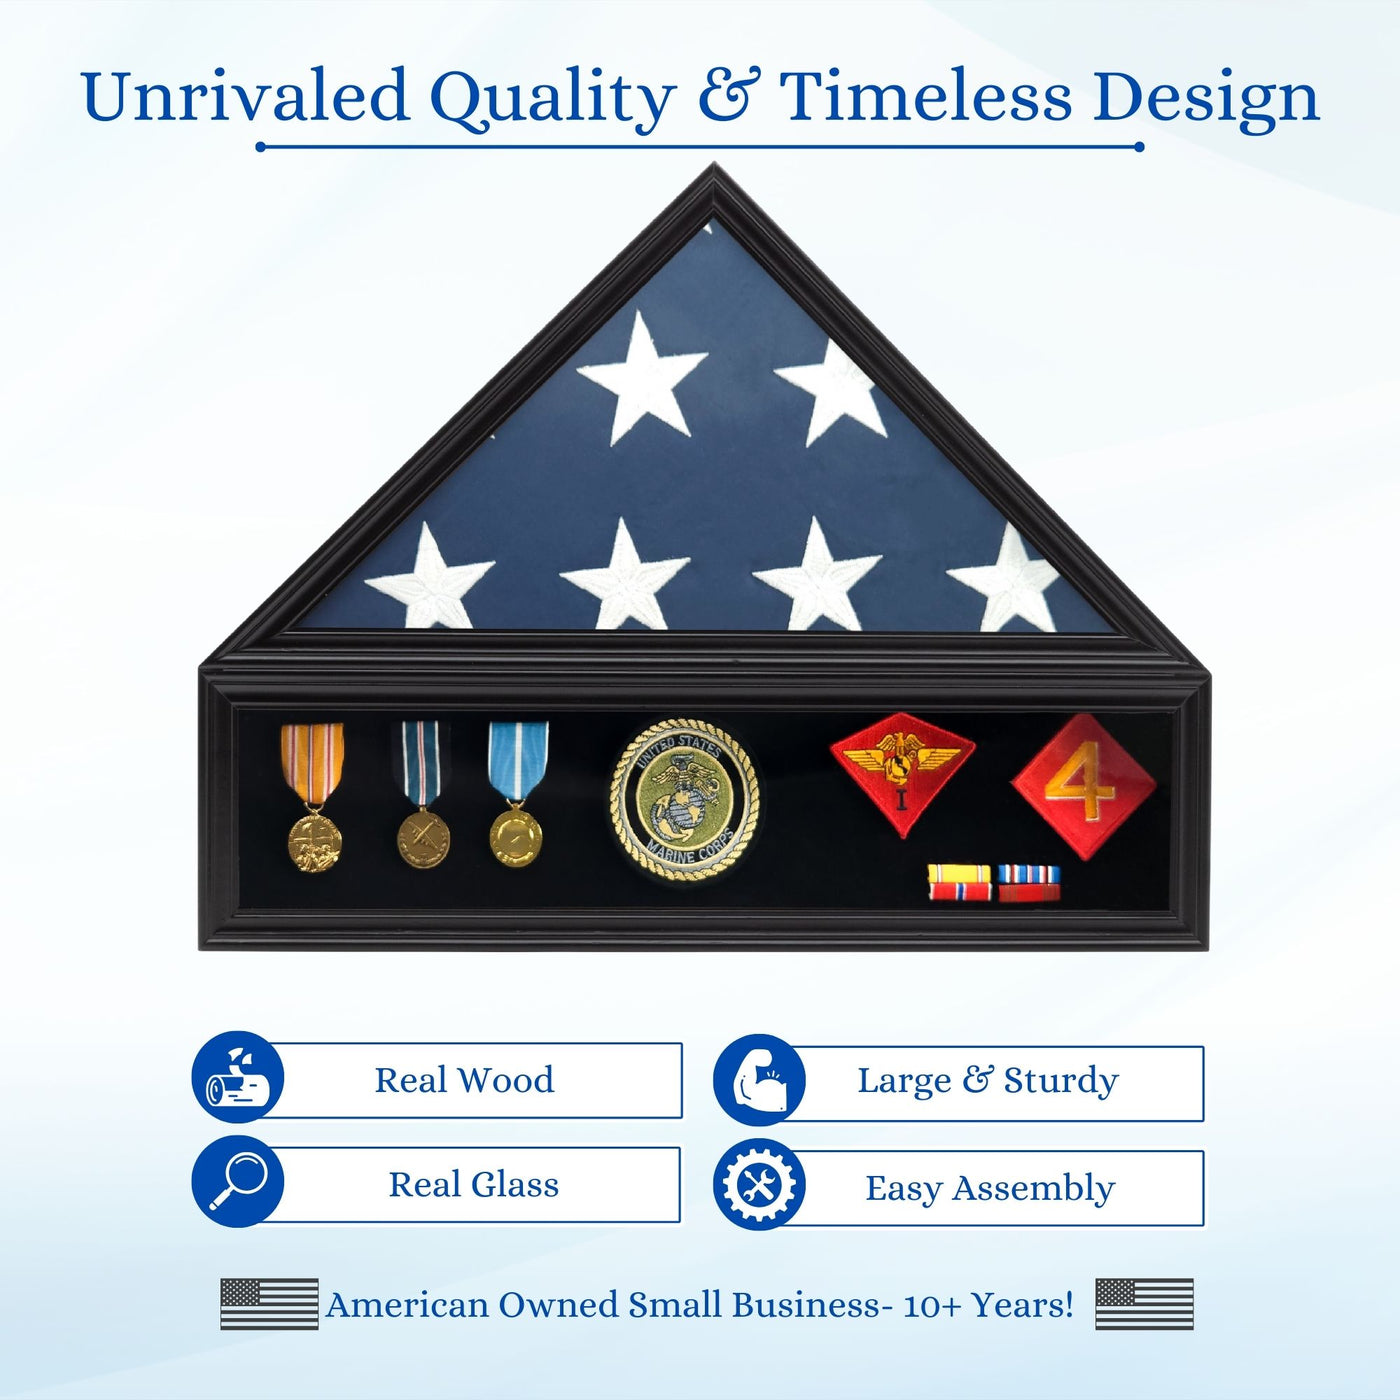 Military Shadow Box Display Case for Funeral Burial Flag for American Veterans Fits Folded 5x9.5’ Flag, Medal, Patches. Solid Wood and Glass.